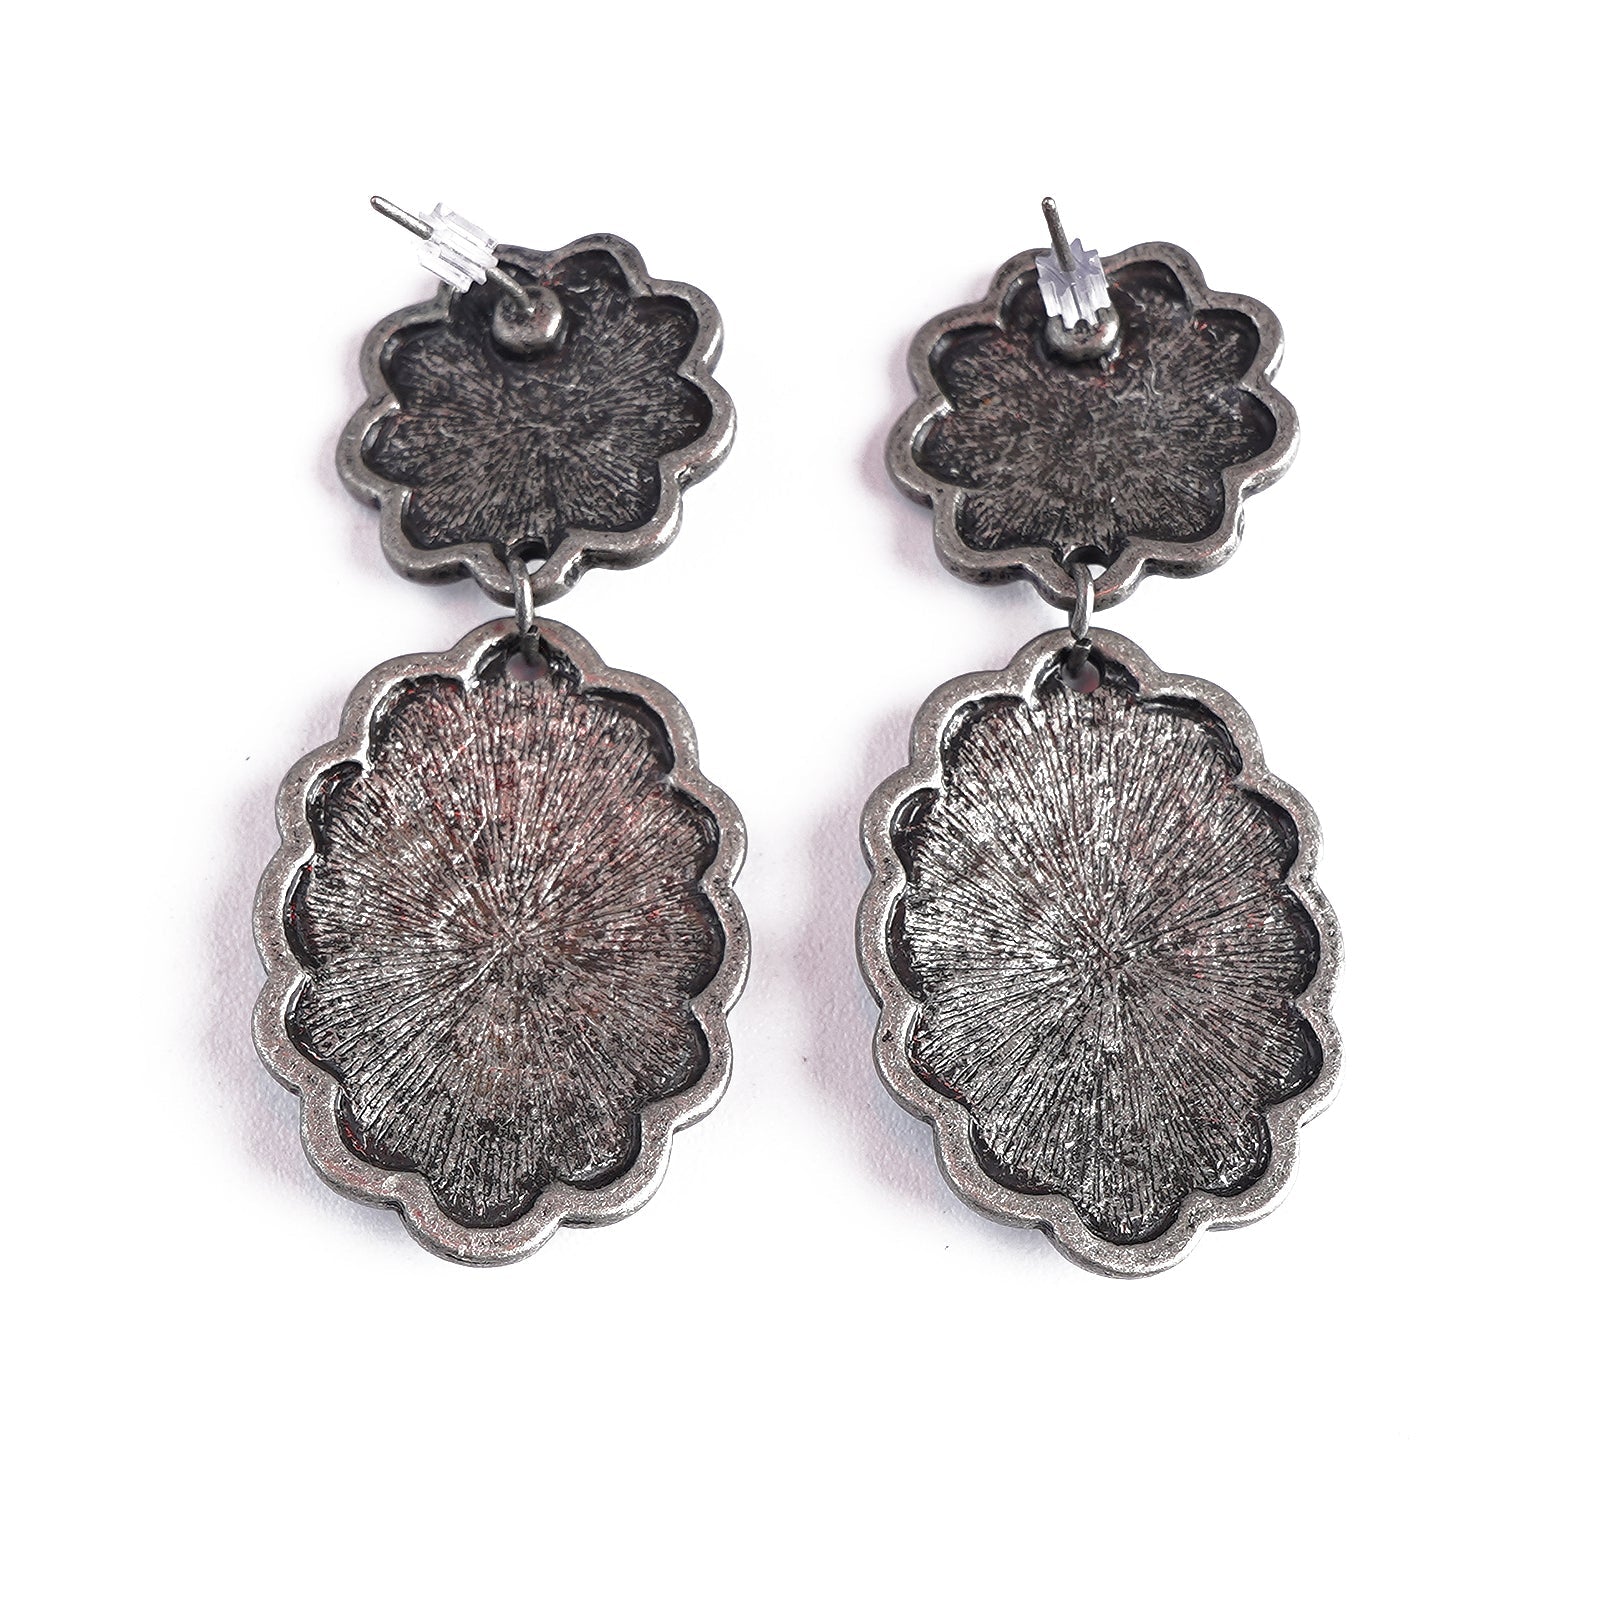 Montana West Silver Oval Floral Concho Dangling Earrings - Montana West World